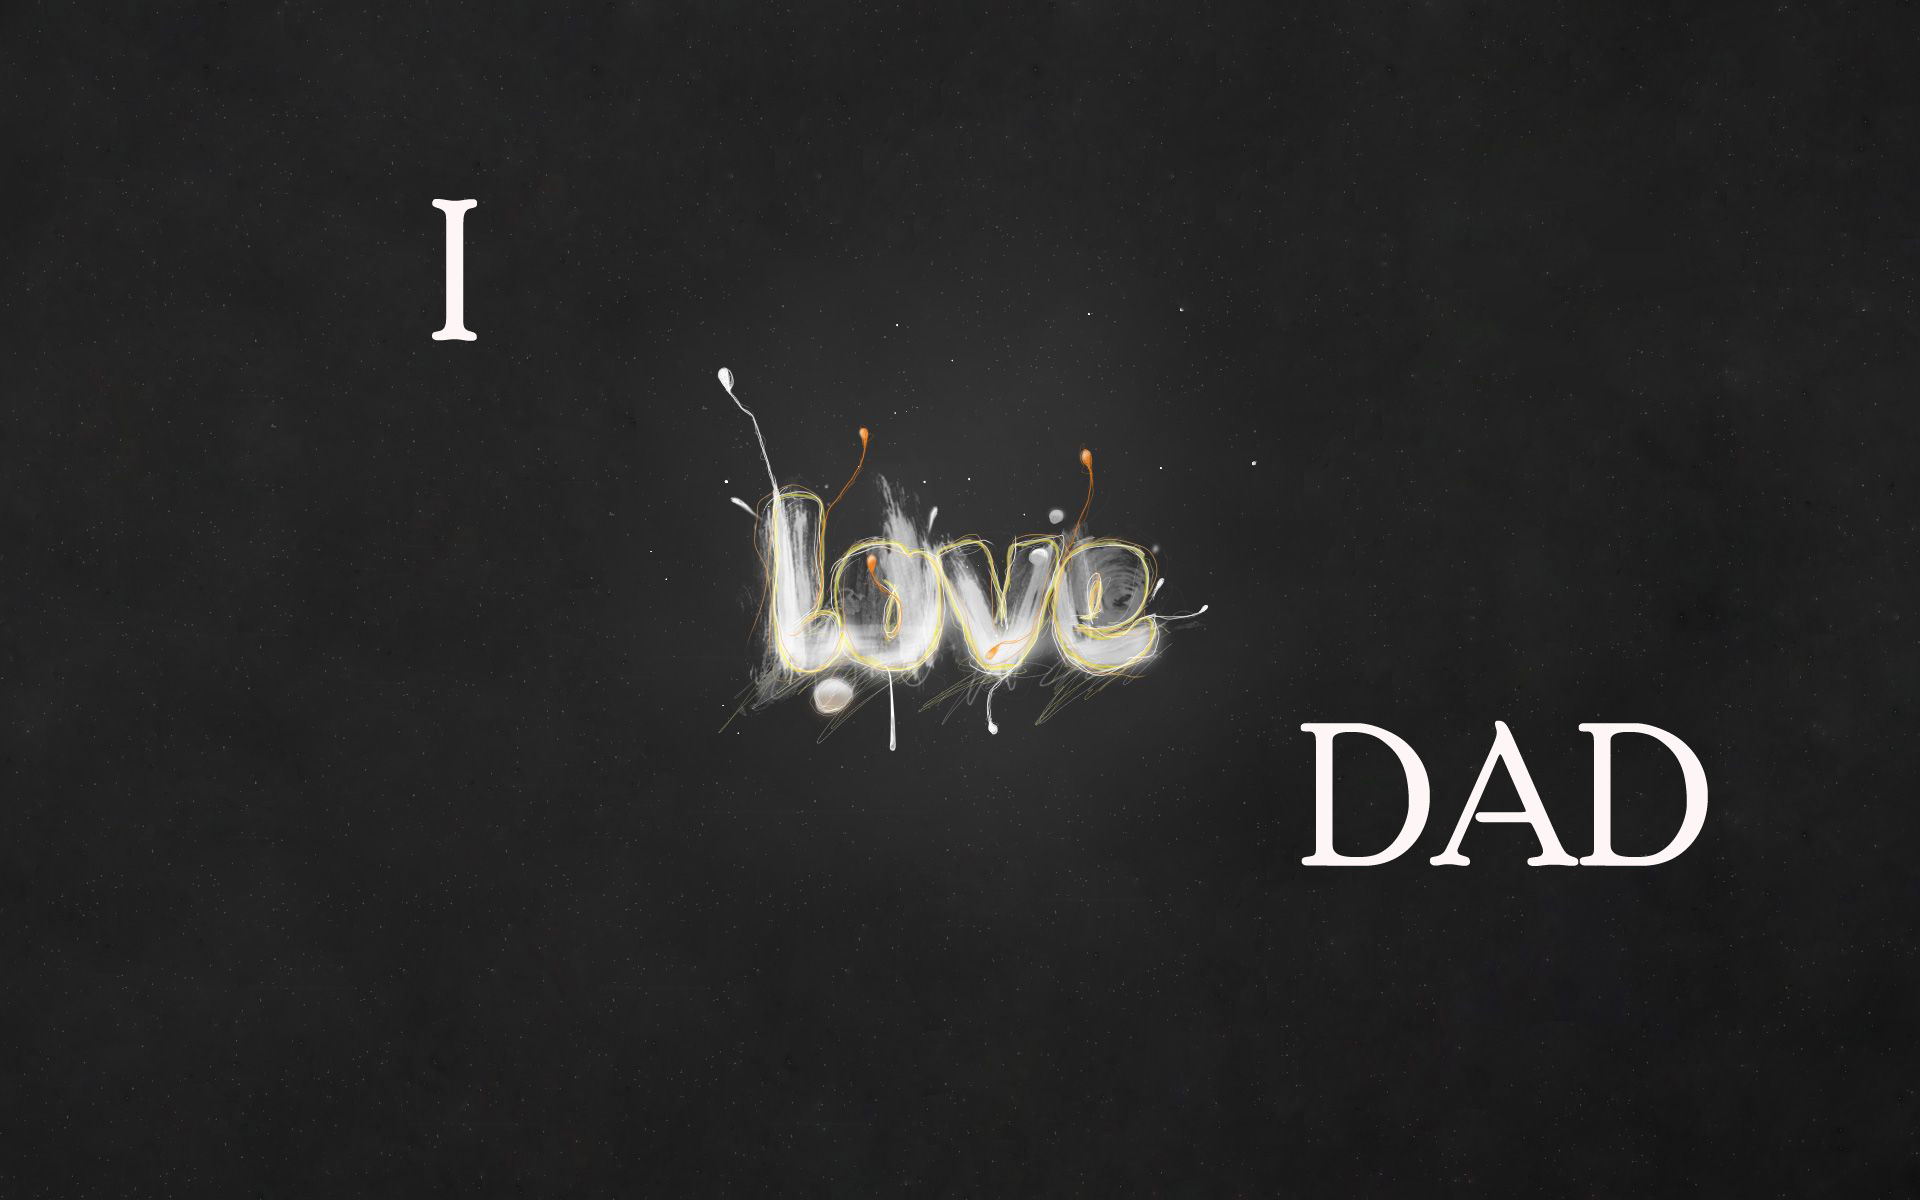 HD Father's Day desktop wallpaper with the message I Love Dad in elegant white letters on a black background.